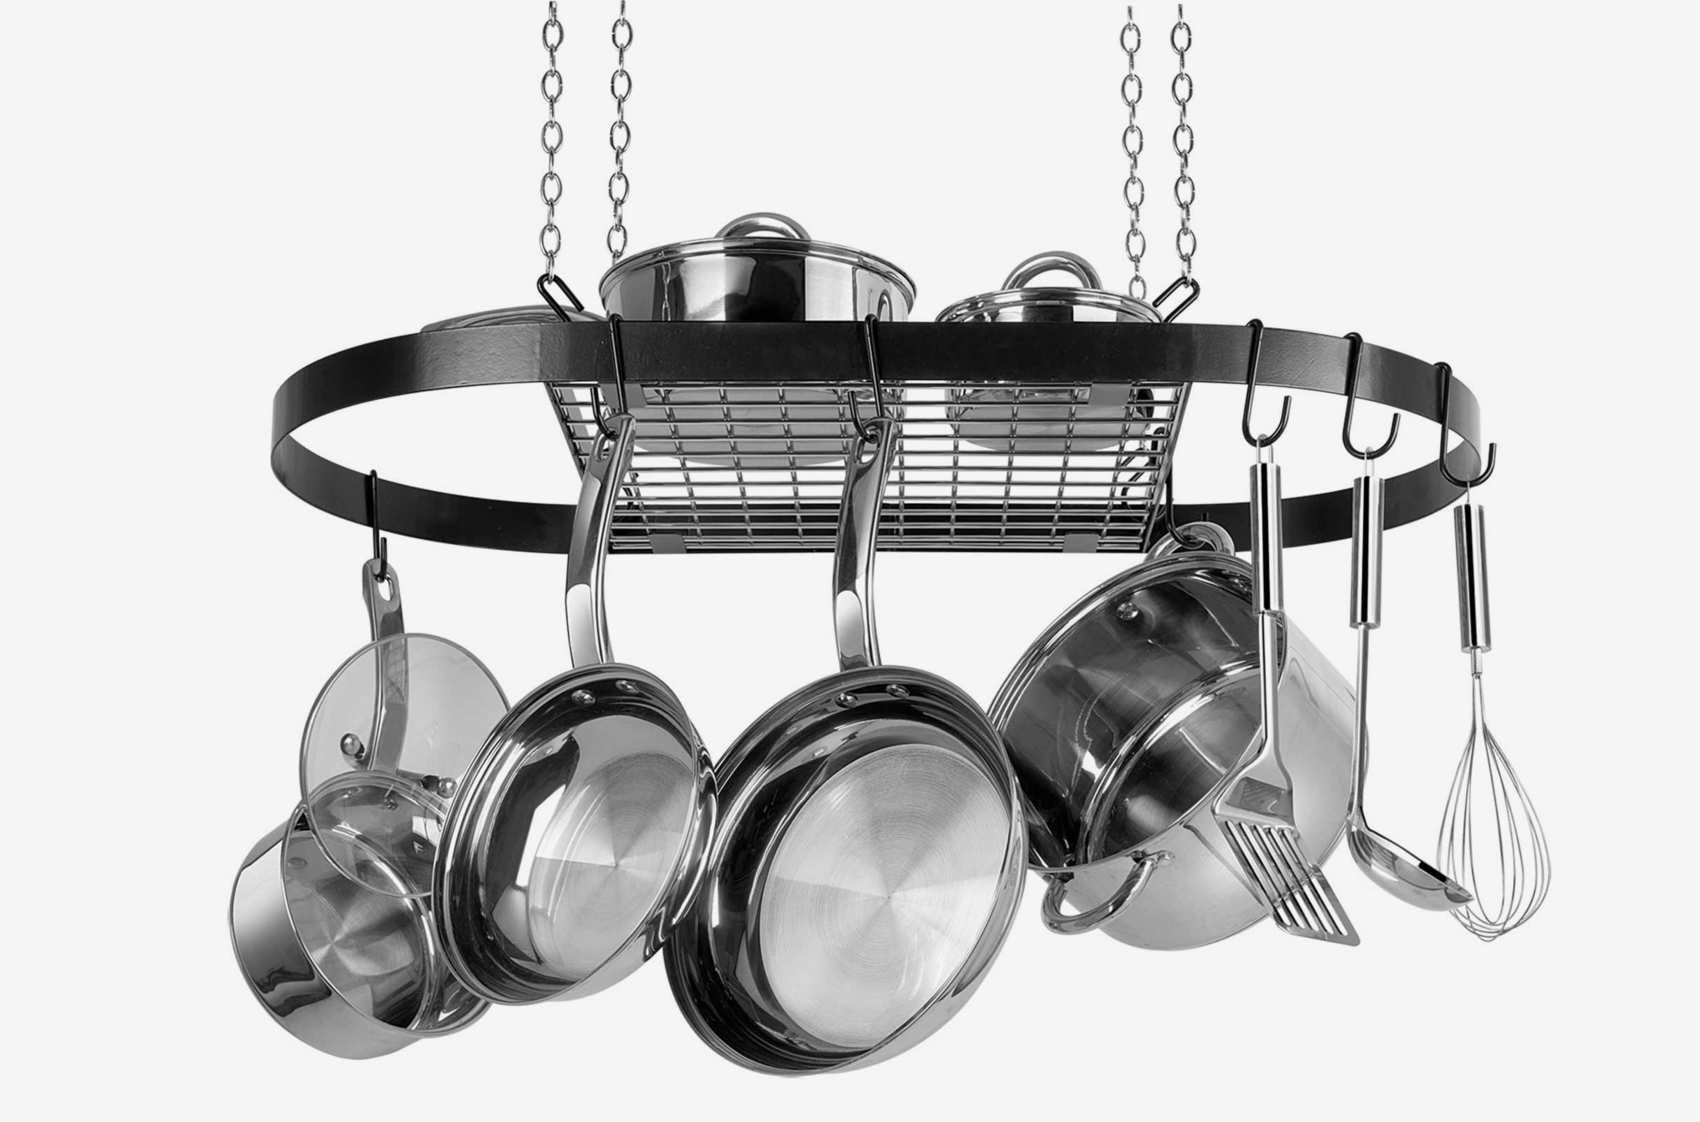 Range Kleen Black Wrought Iron and Stainless Steel Oval Pot Rack Includes 4 Ceiling Hooks